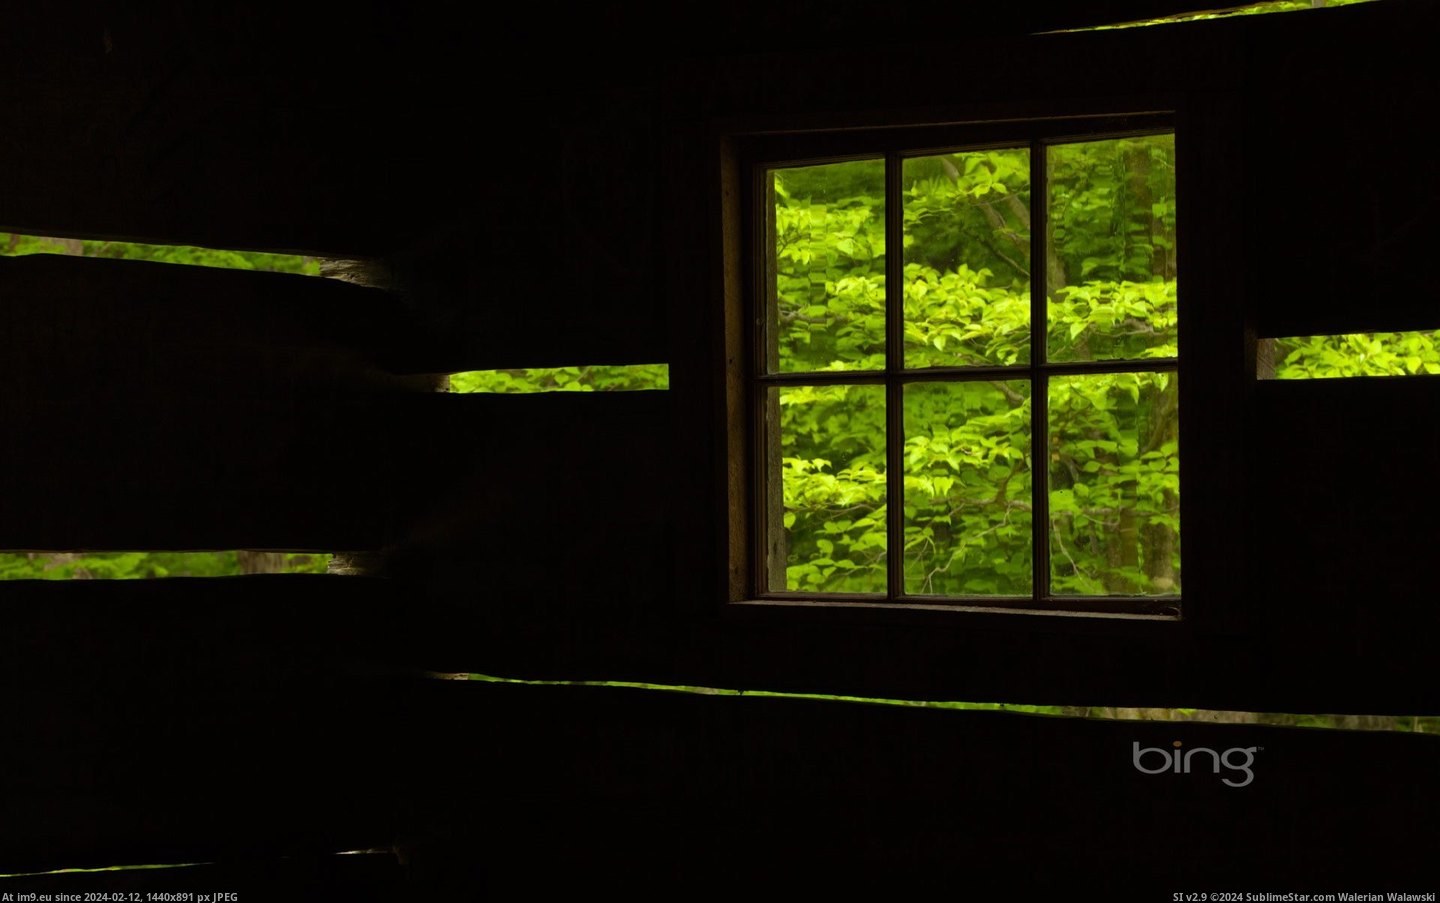 Alex Cole Cabin at Jim Bales Place, Roaring Fork Motor Nature Trail in the Great Smoky Mountains National Park, Tennessee (© Get (in Best photos of February 2013)